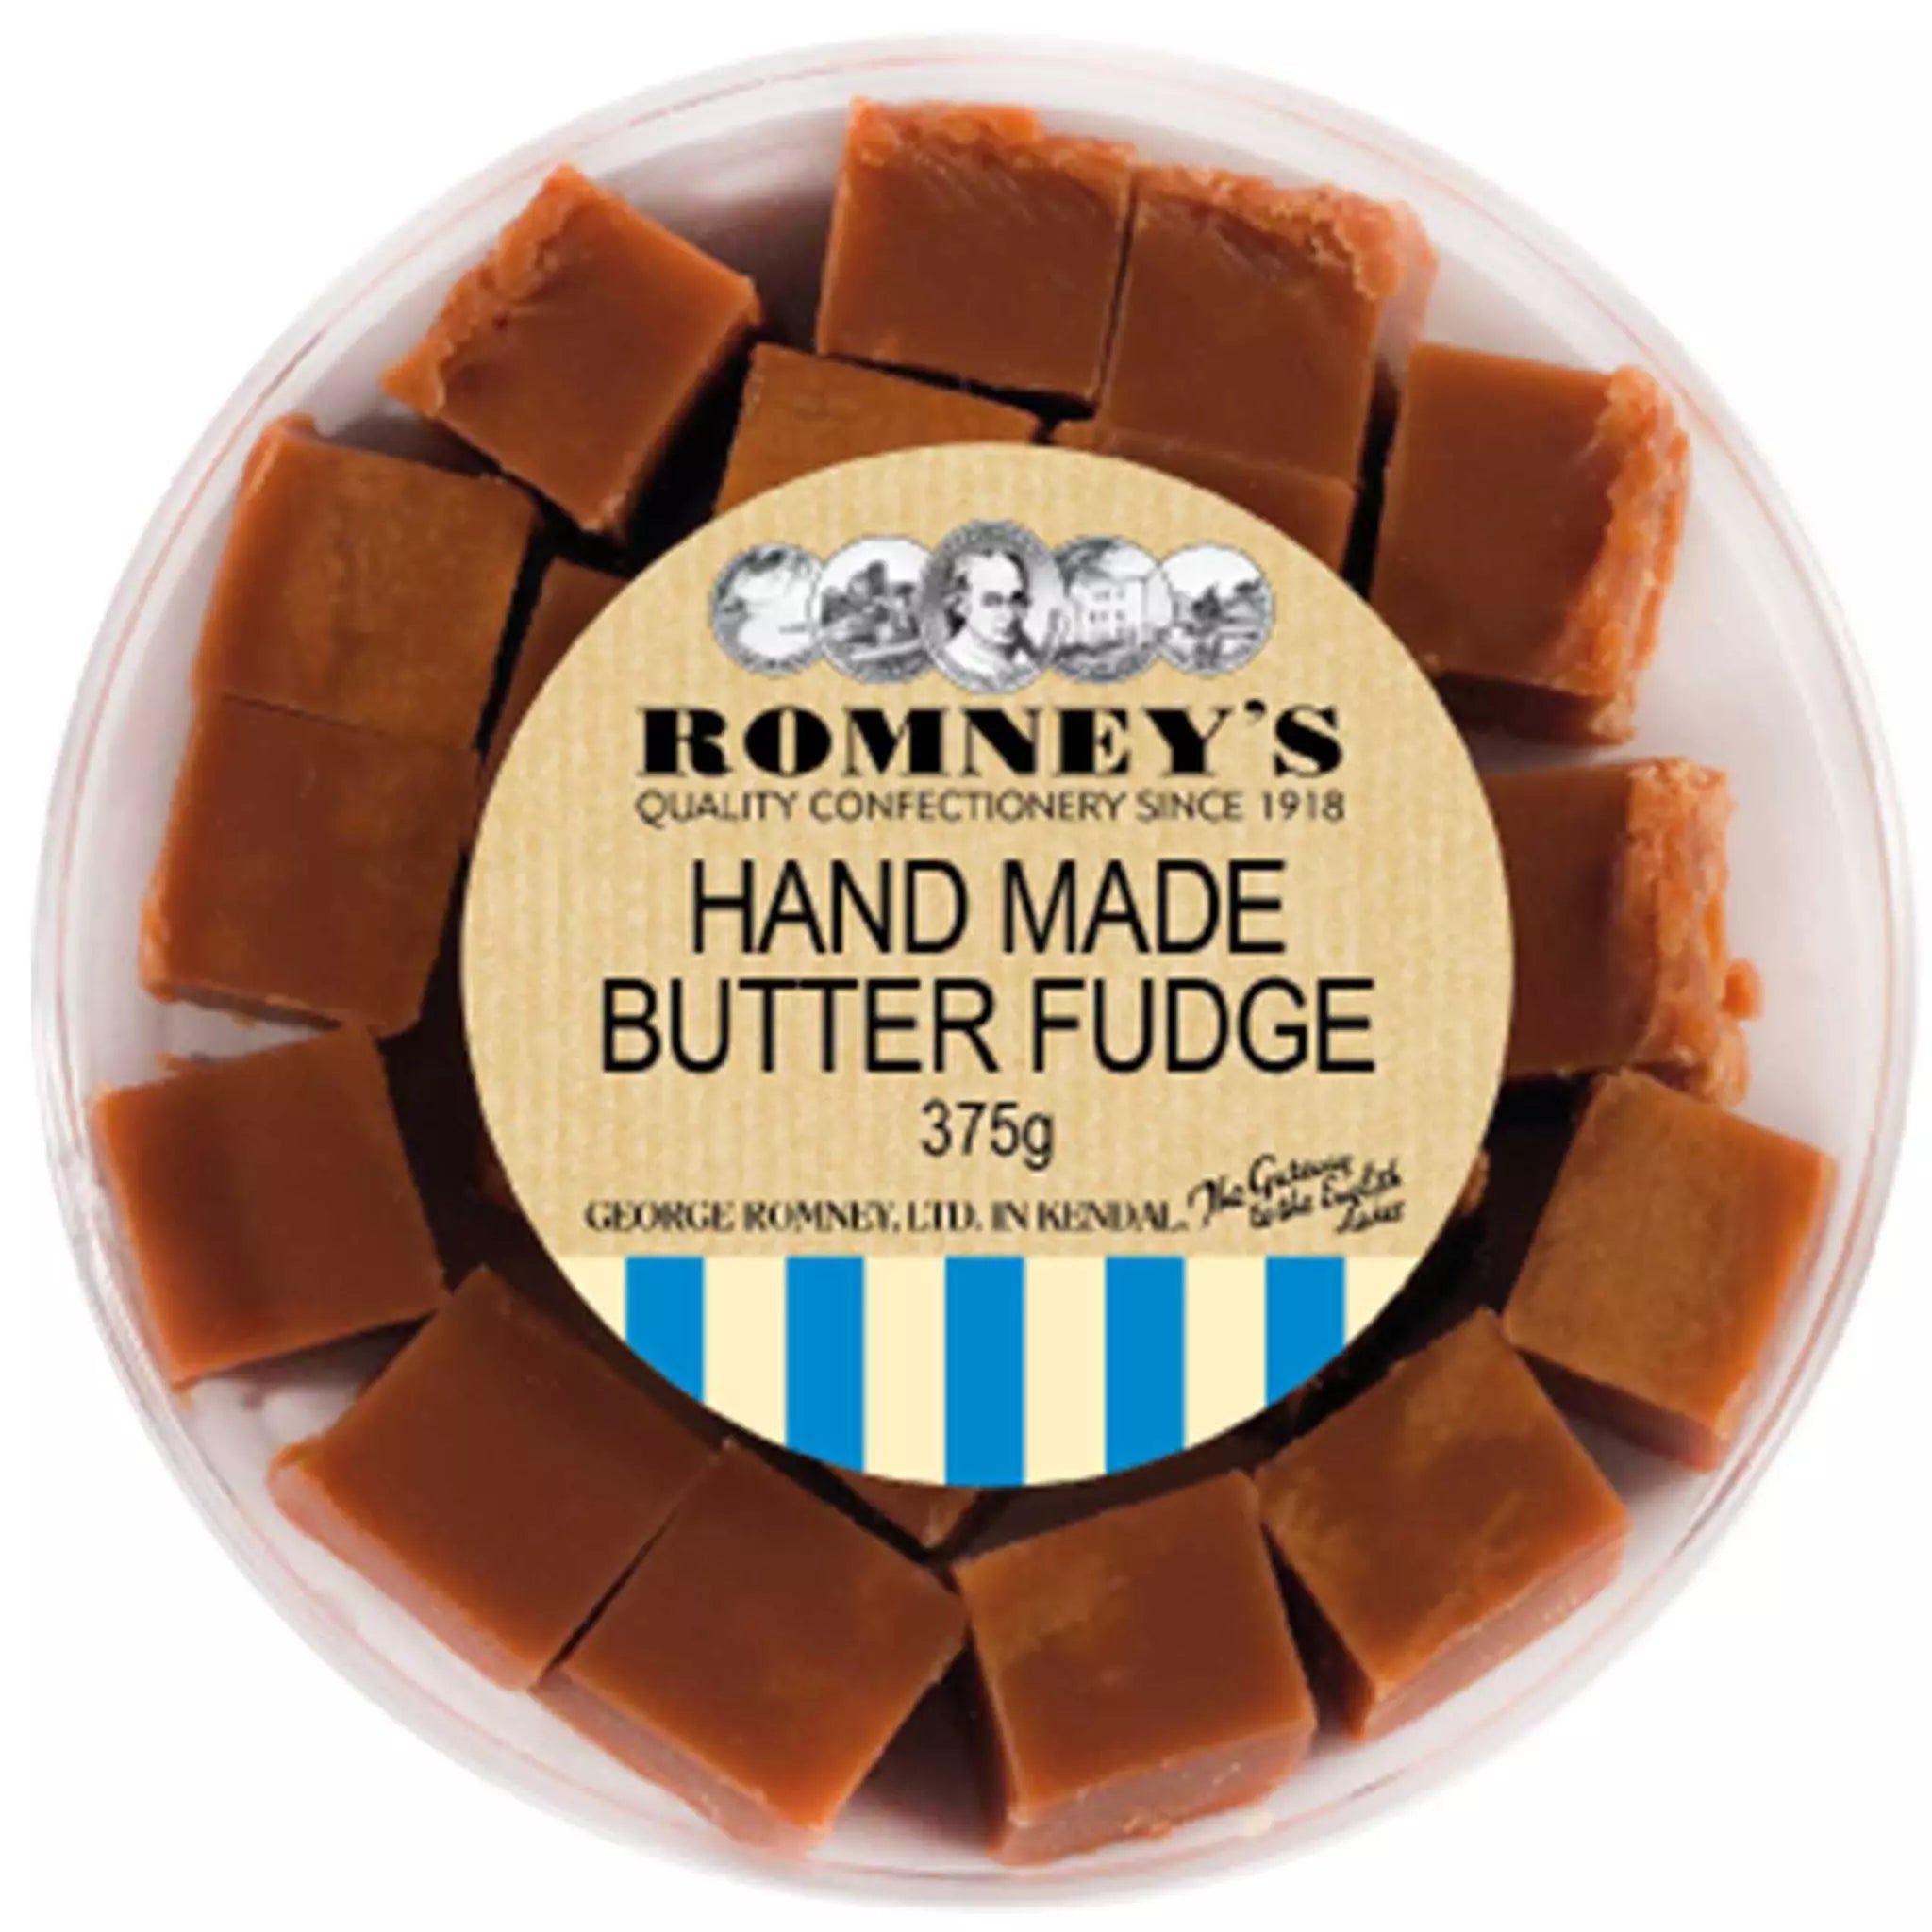 A circular plastic container which is filled with Fudge pieces. The lid of the tub has a sticker on it that is cream coloured and has the Romney's logo and words 'Hand Made Butter Fudge' on it.